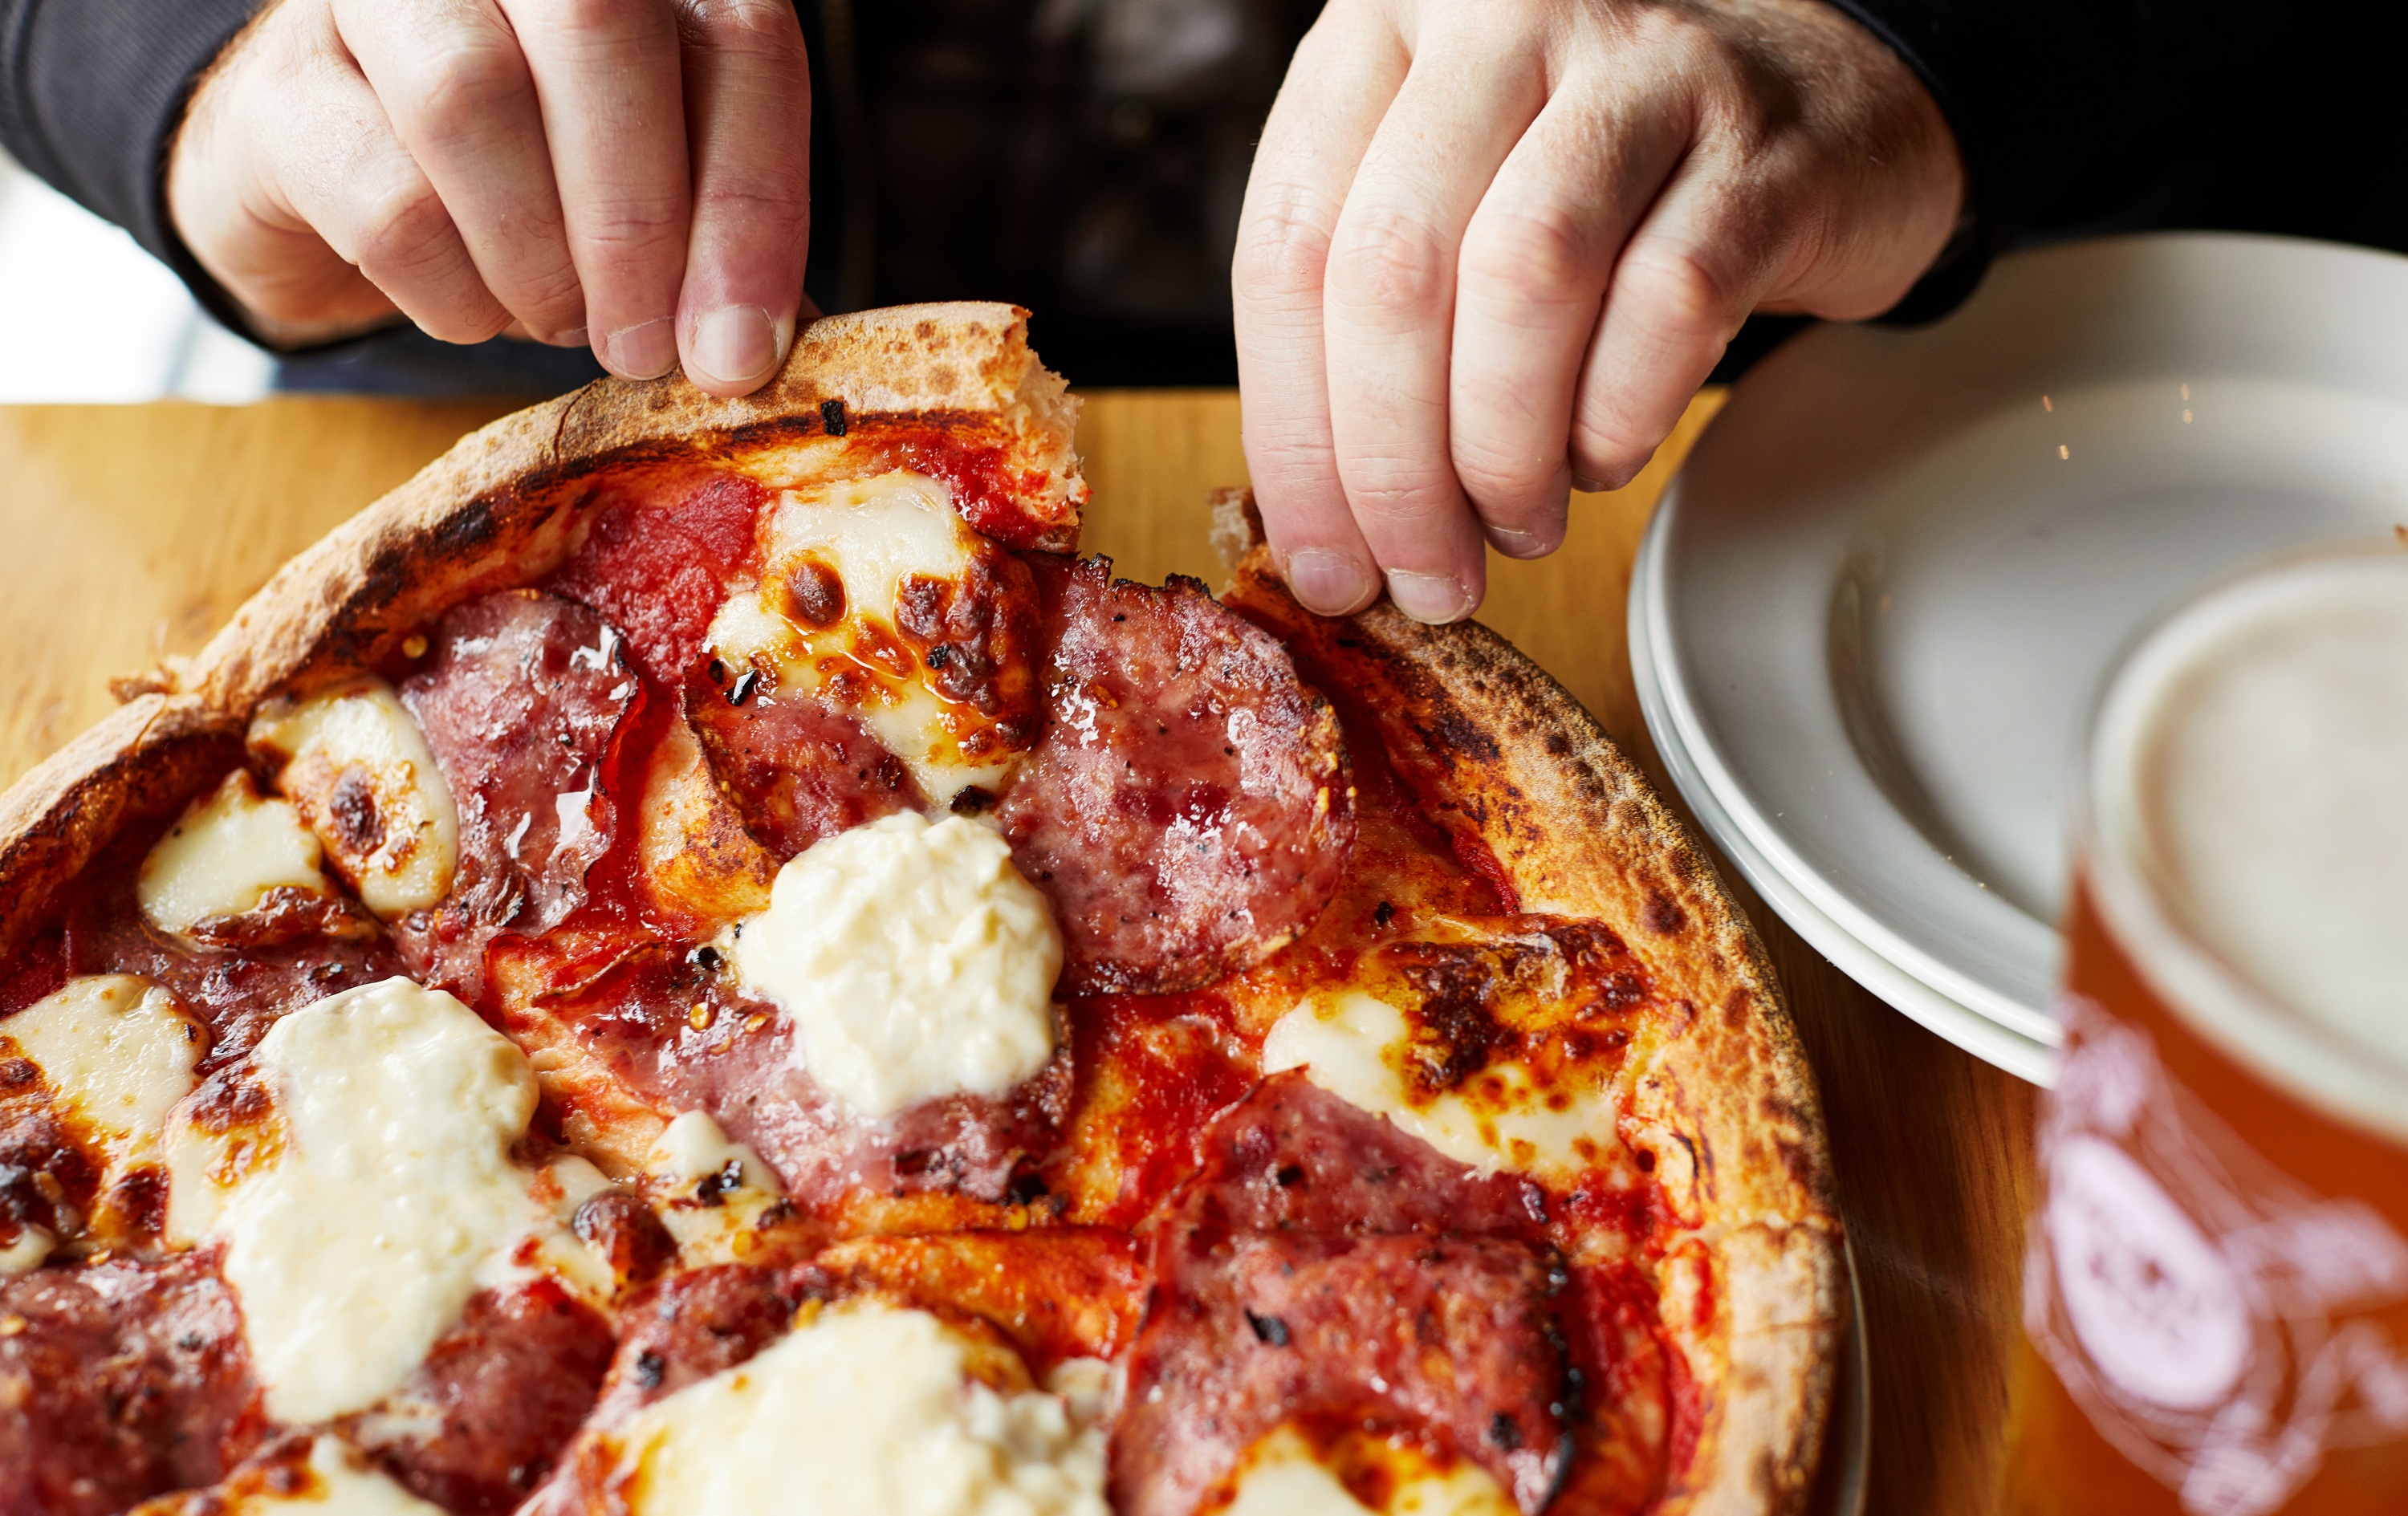 Looking for the best pizza in Melbourne? This buffalo cheese covered slice from Primo may be it.